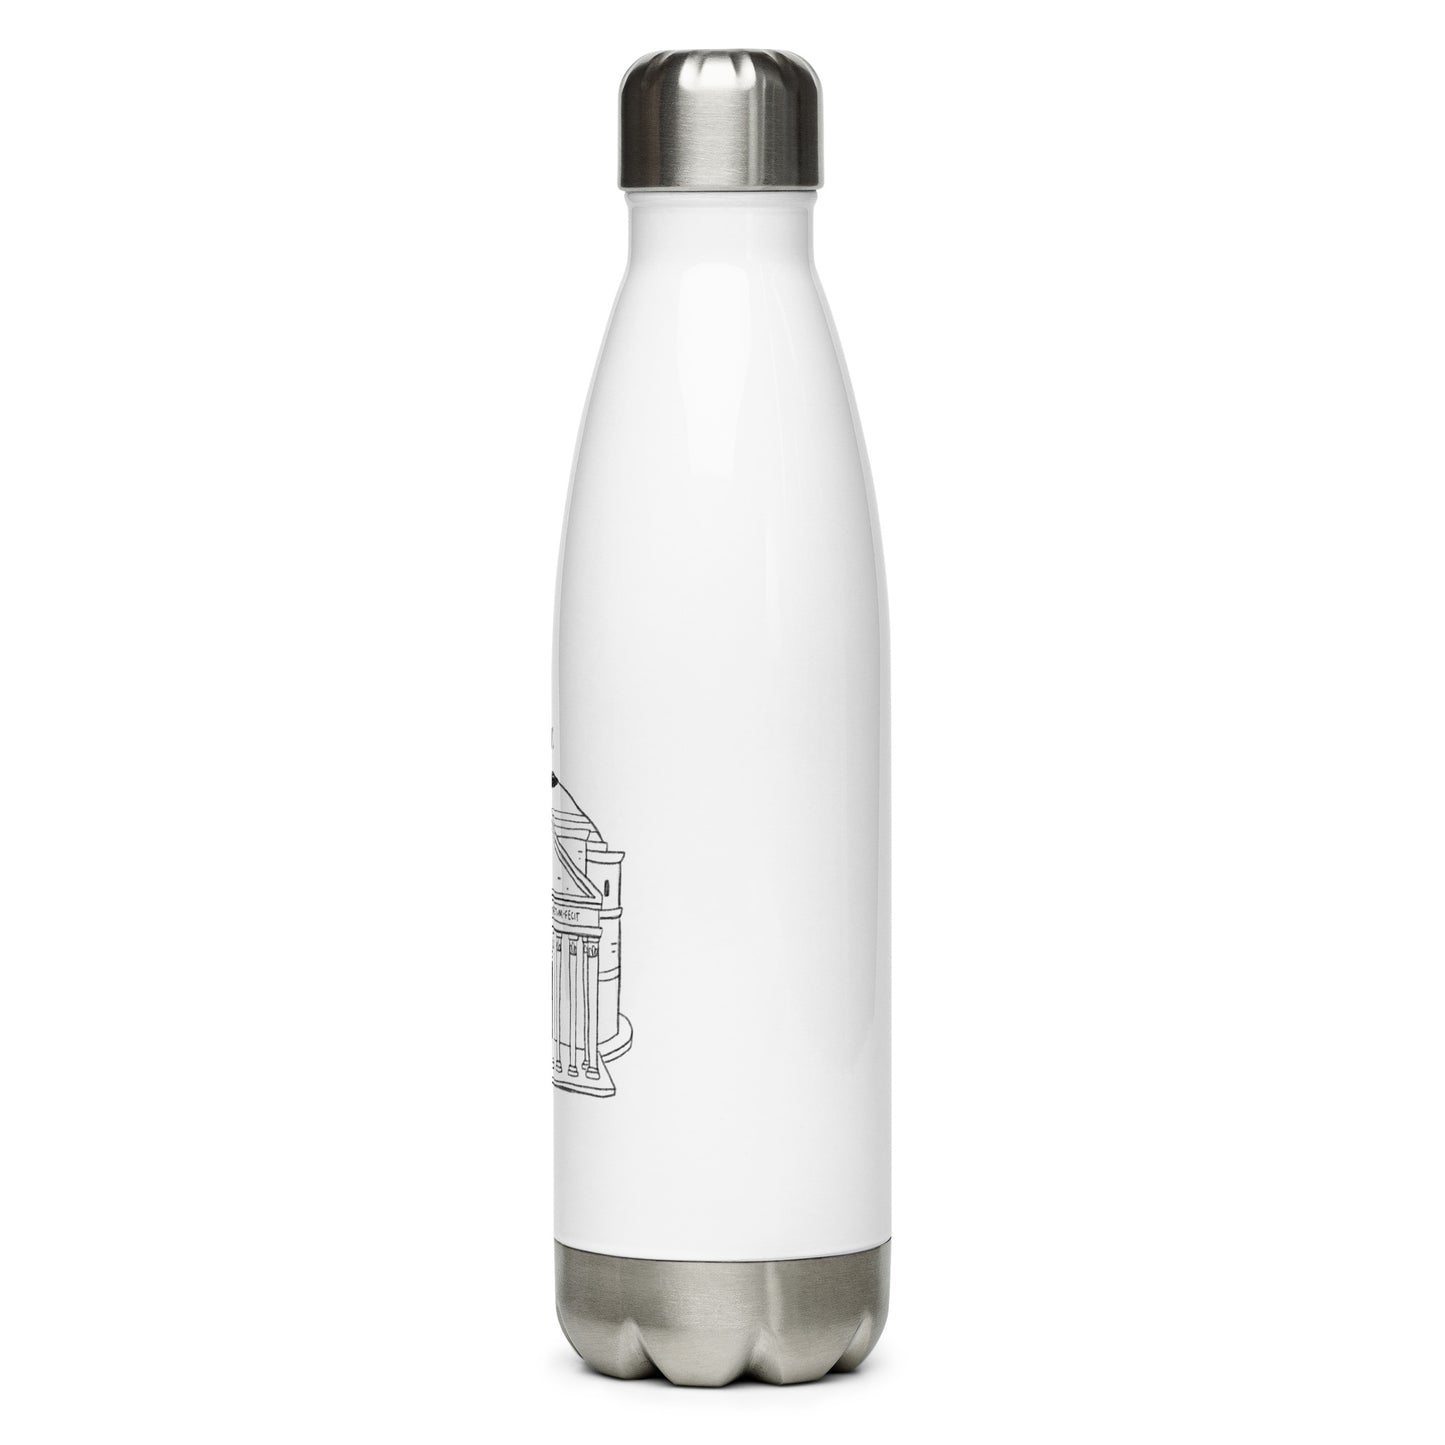 Pantheon on a Stainless steel water bottle